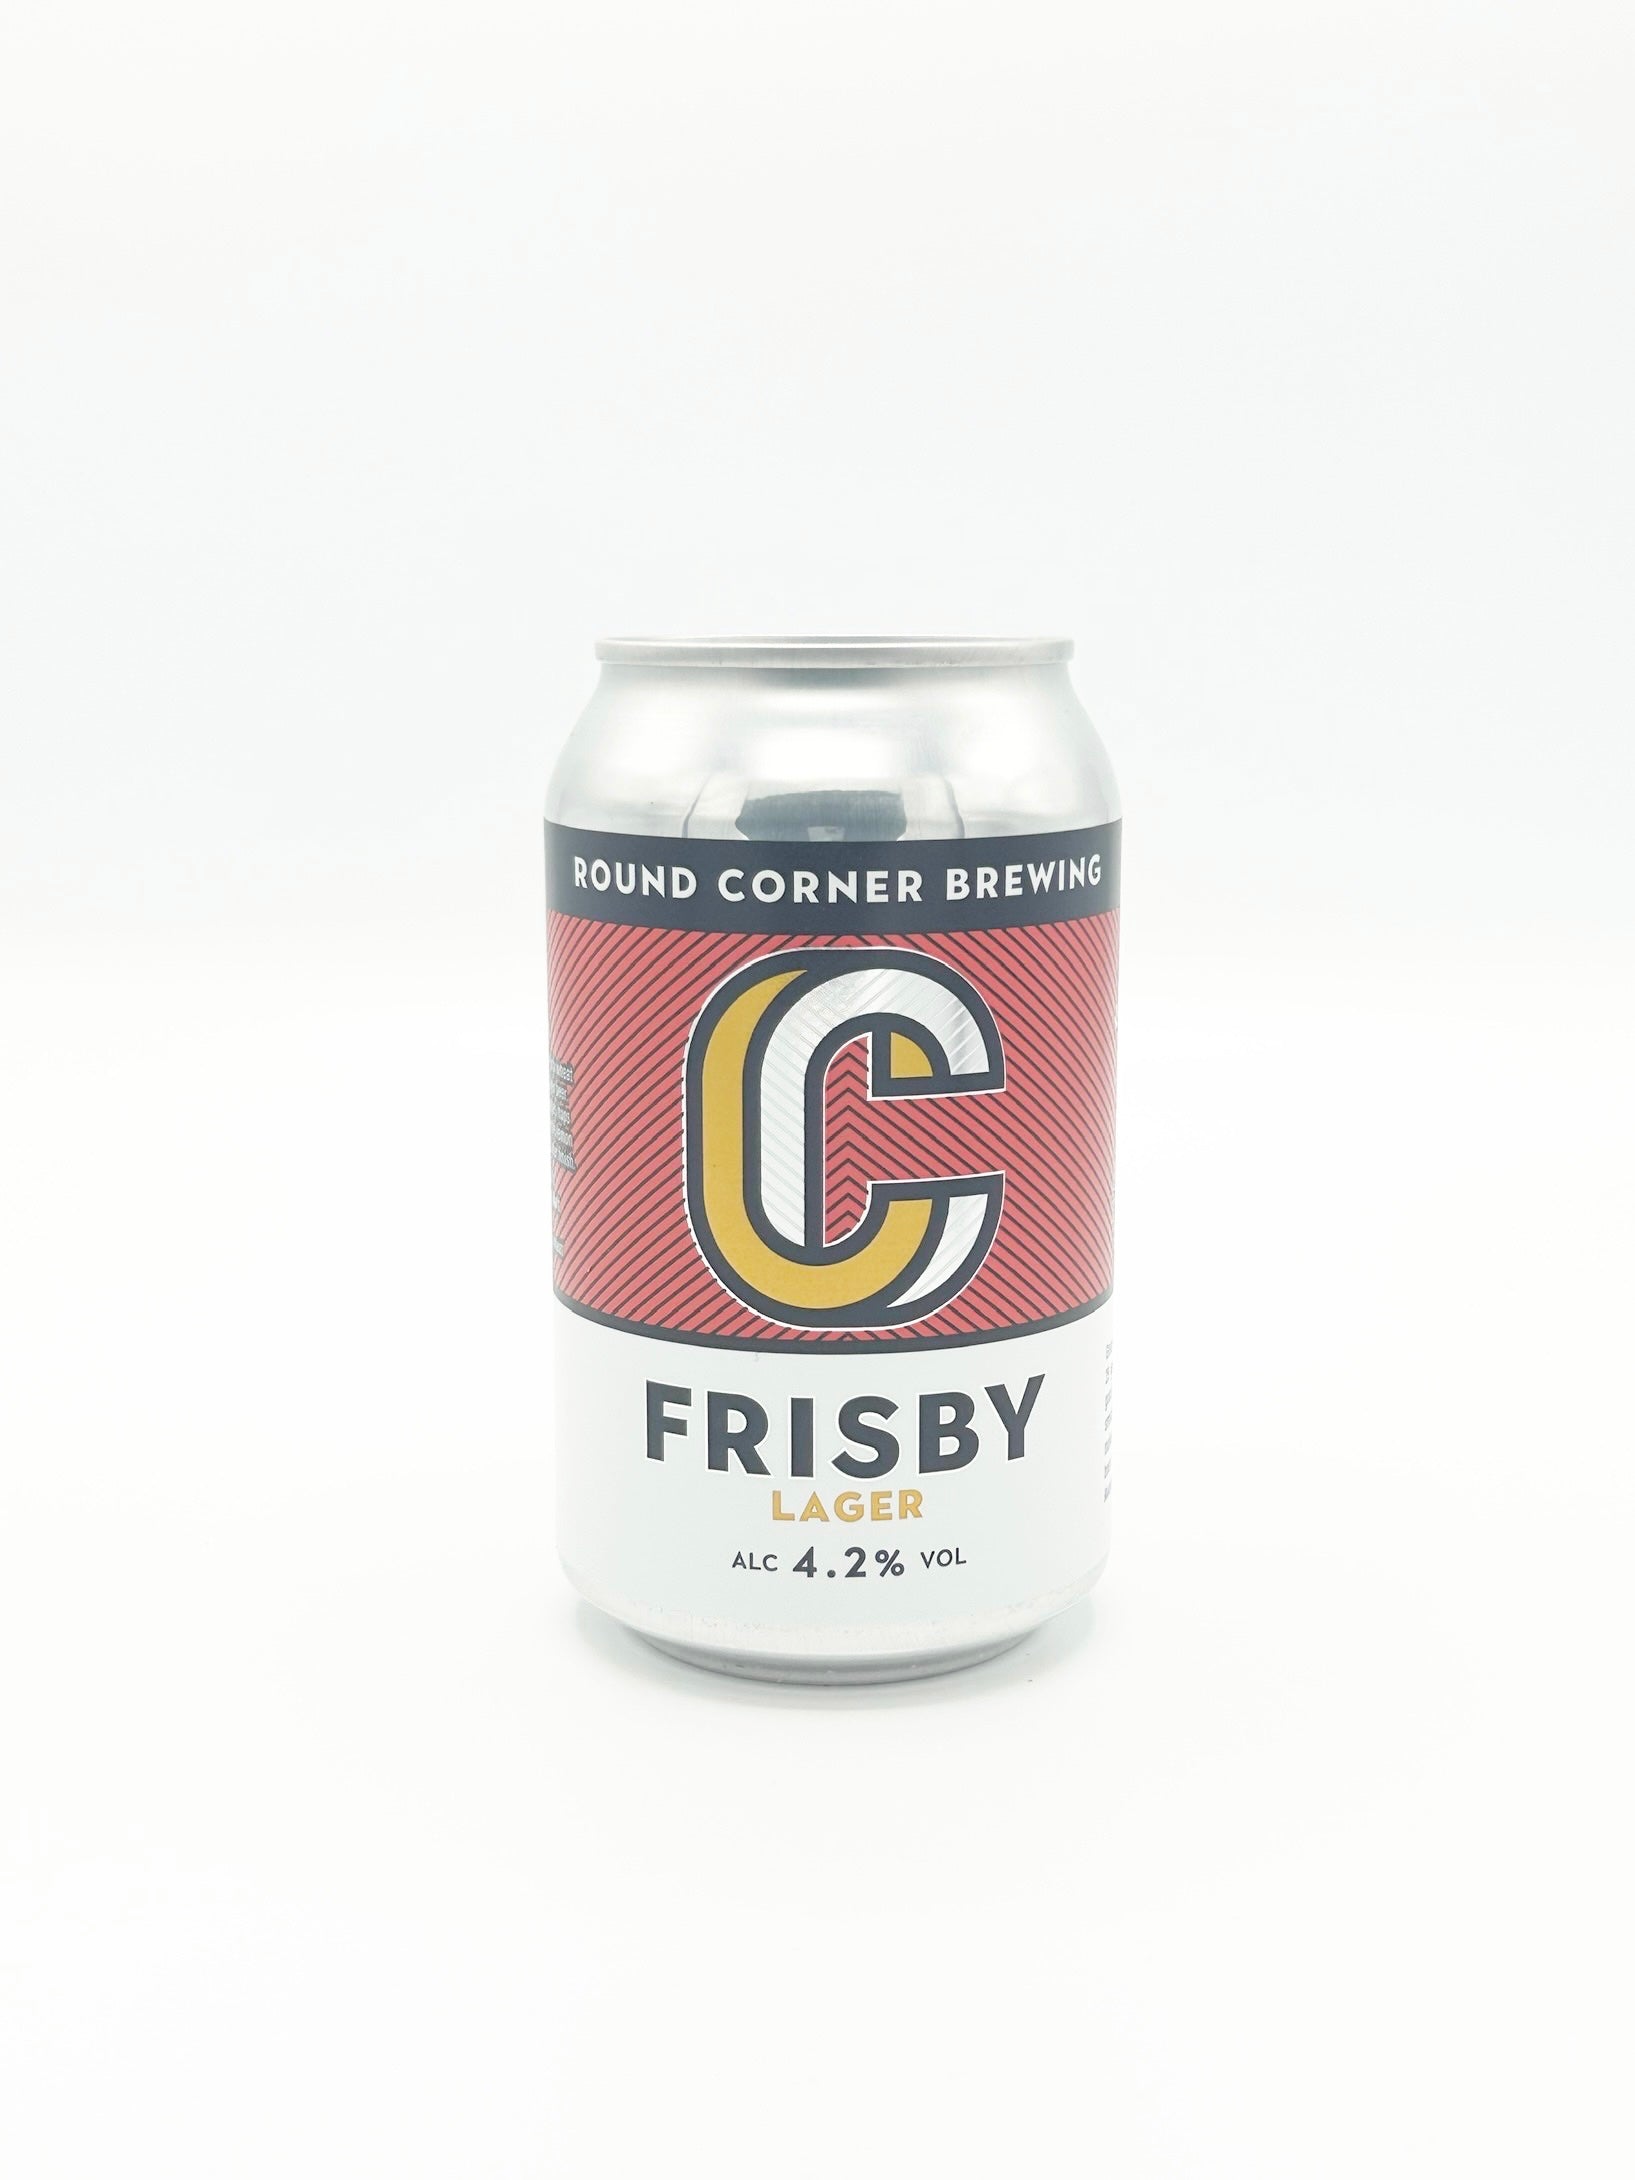 Round Corner Brewing Frisby Lager 4.2%